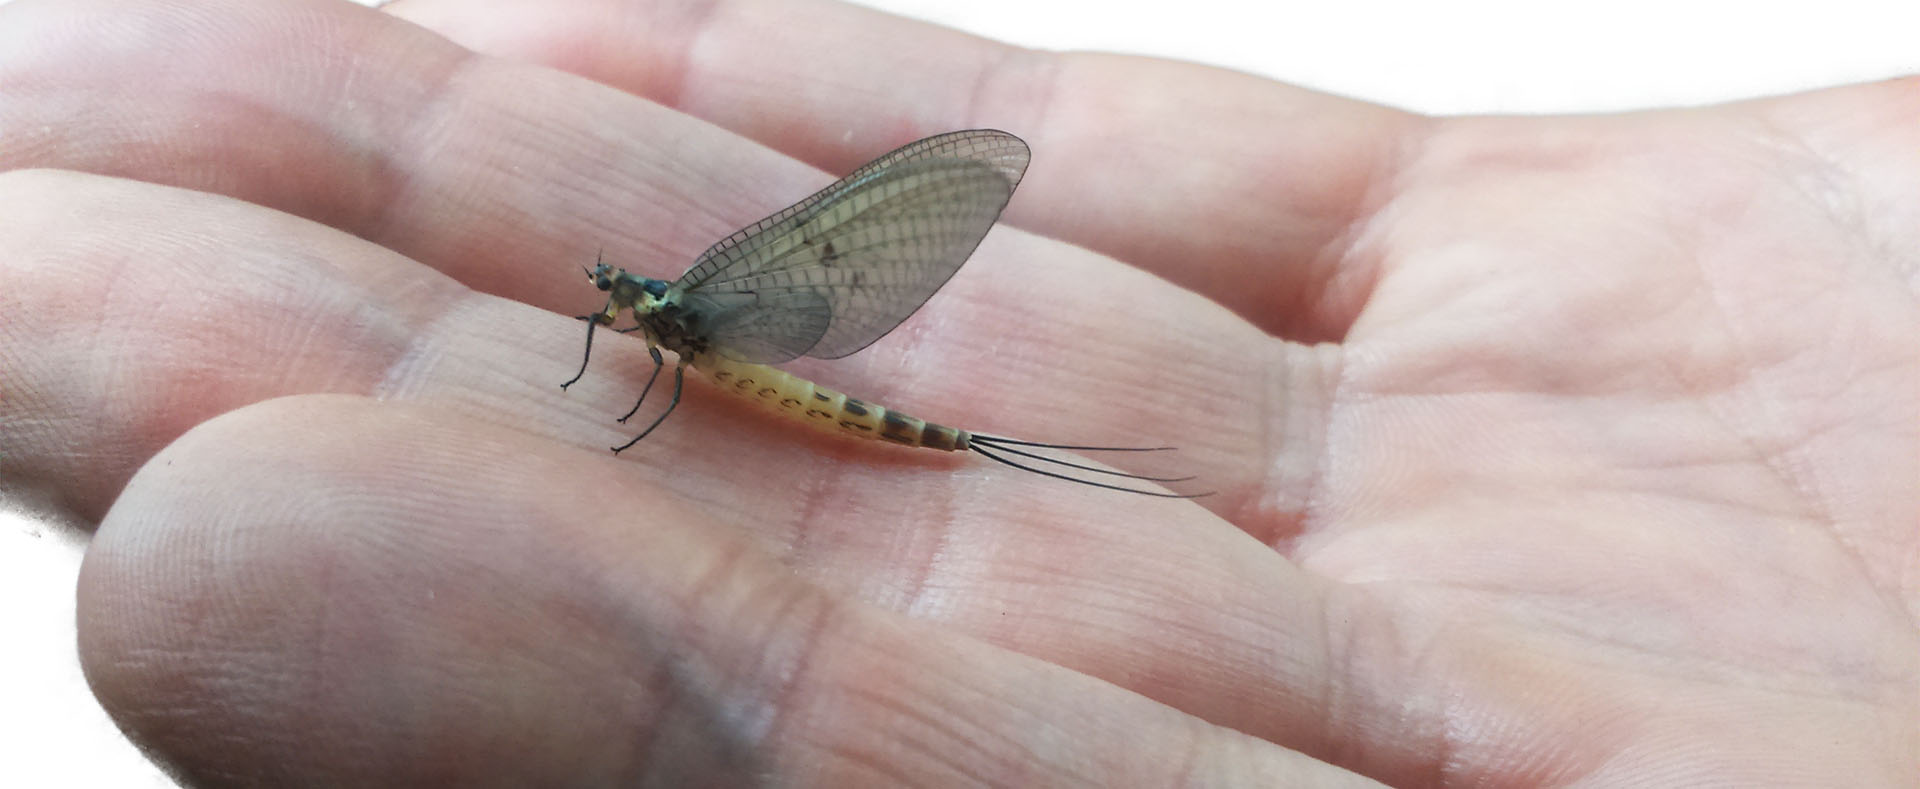 Mayfly in hand smalle